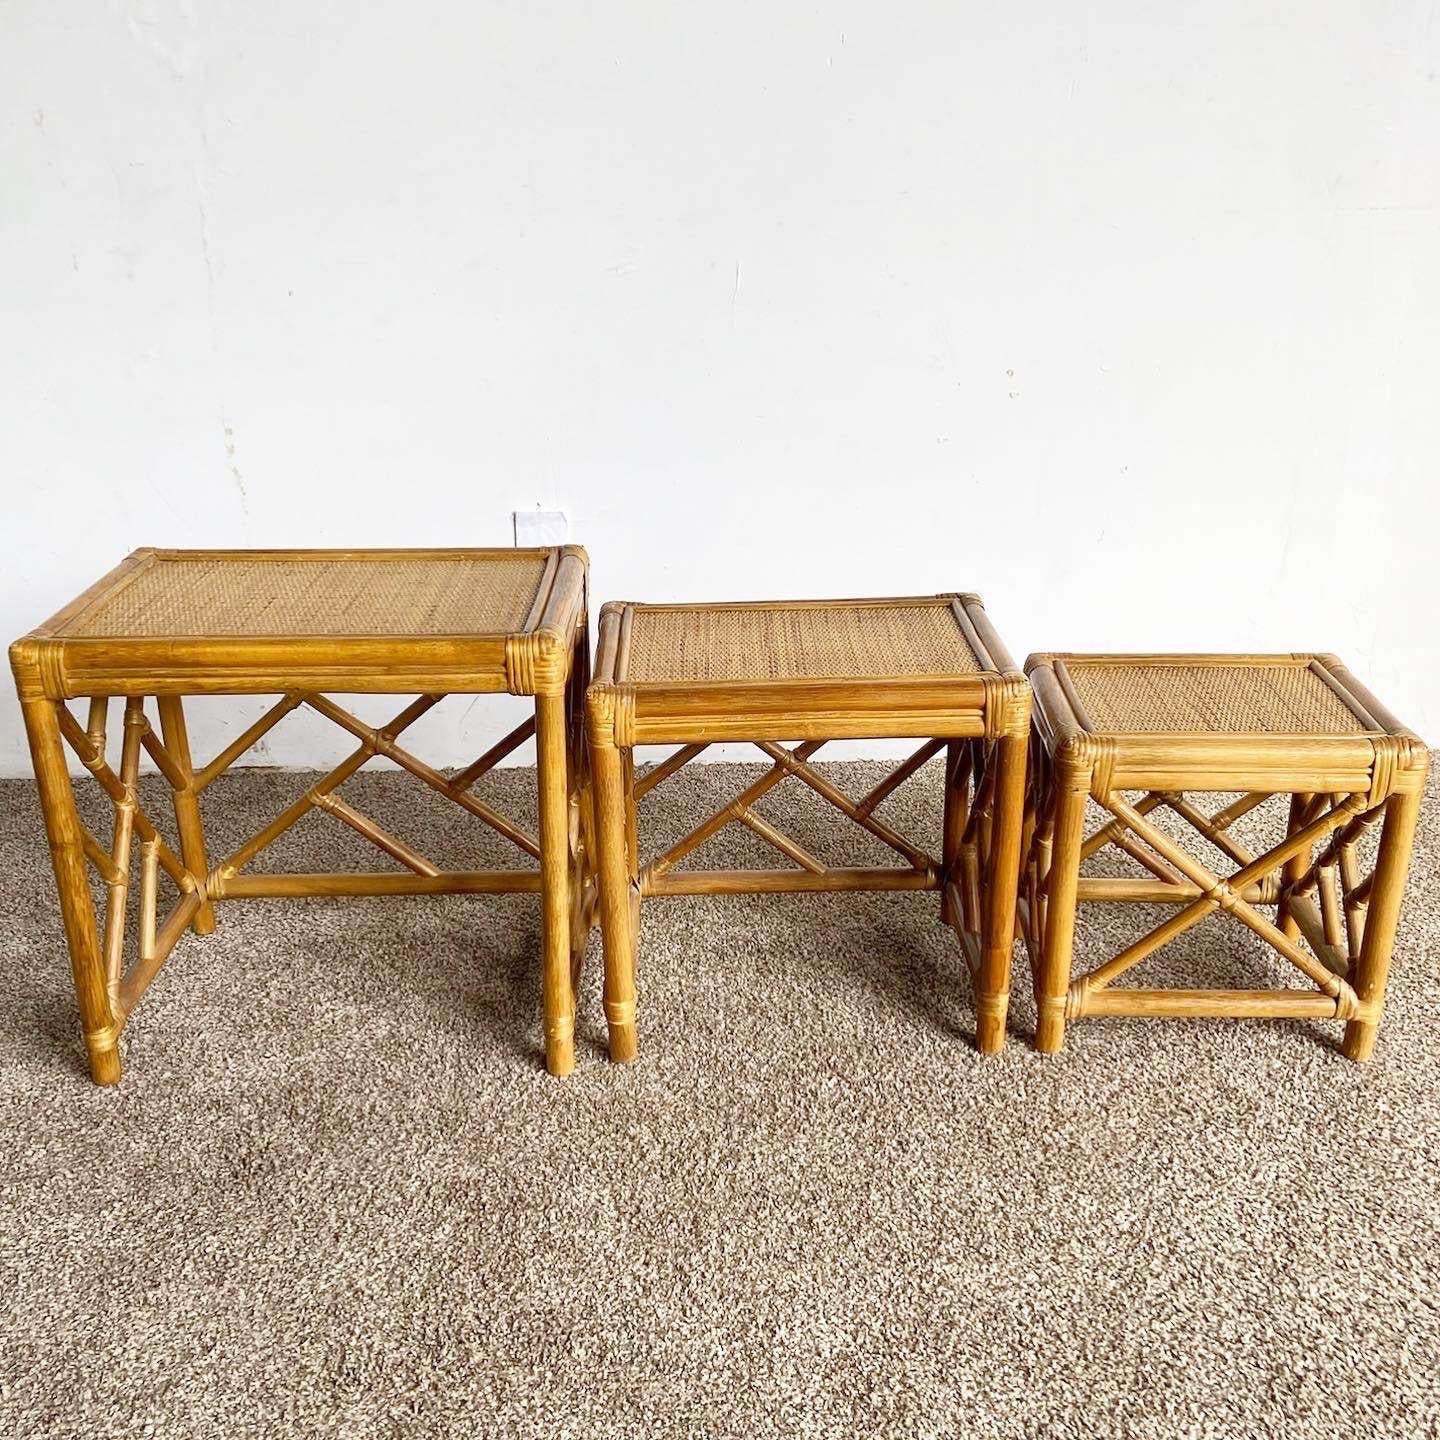 Late 20th Century Boho Chic Chippendale Bamboo Rattan and Wicker Nesting Tables - Set of 3 For Sale